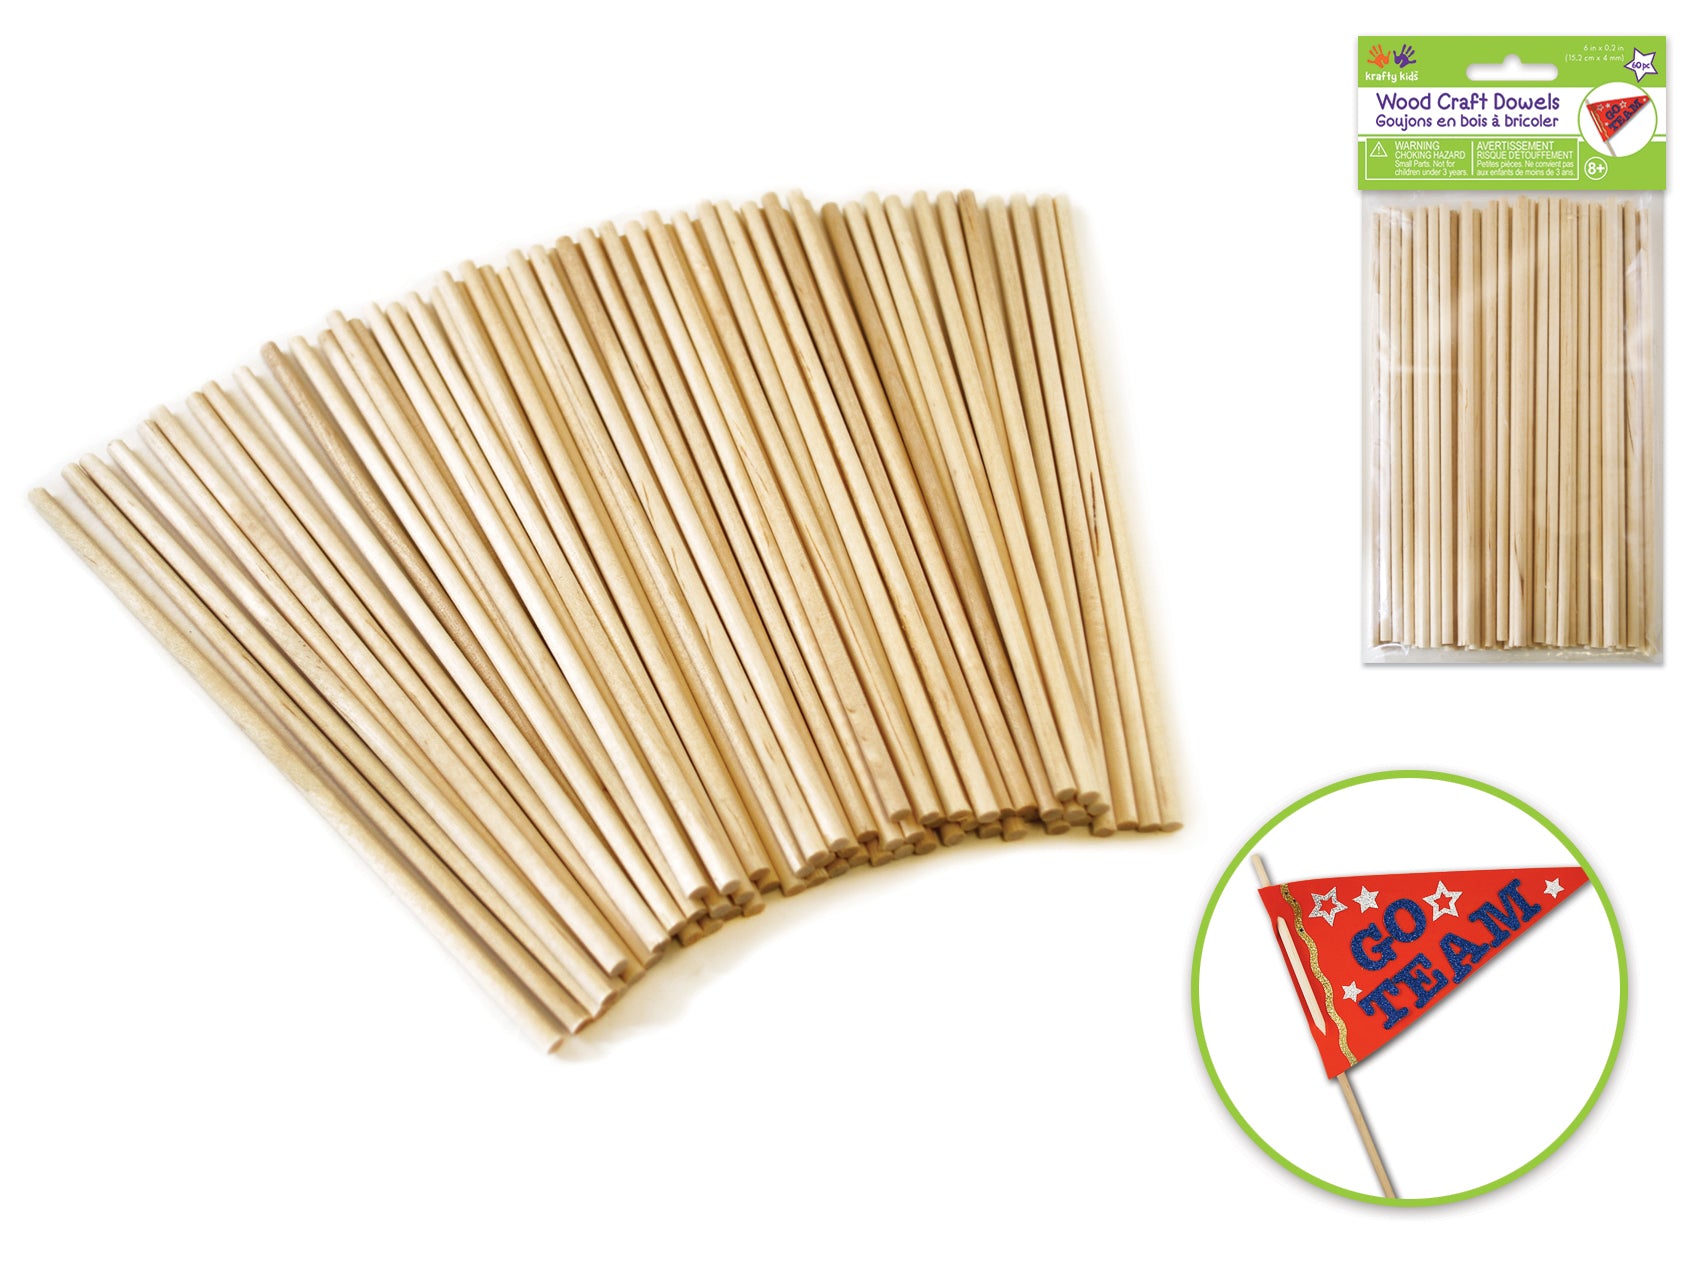 Craftwood Natural Dowel, 5/32" (4mm) x 6", Pack of 60